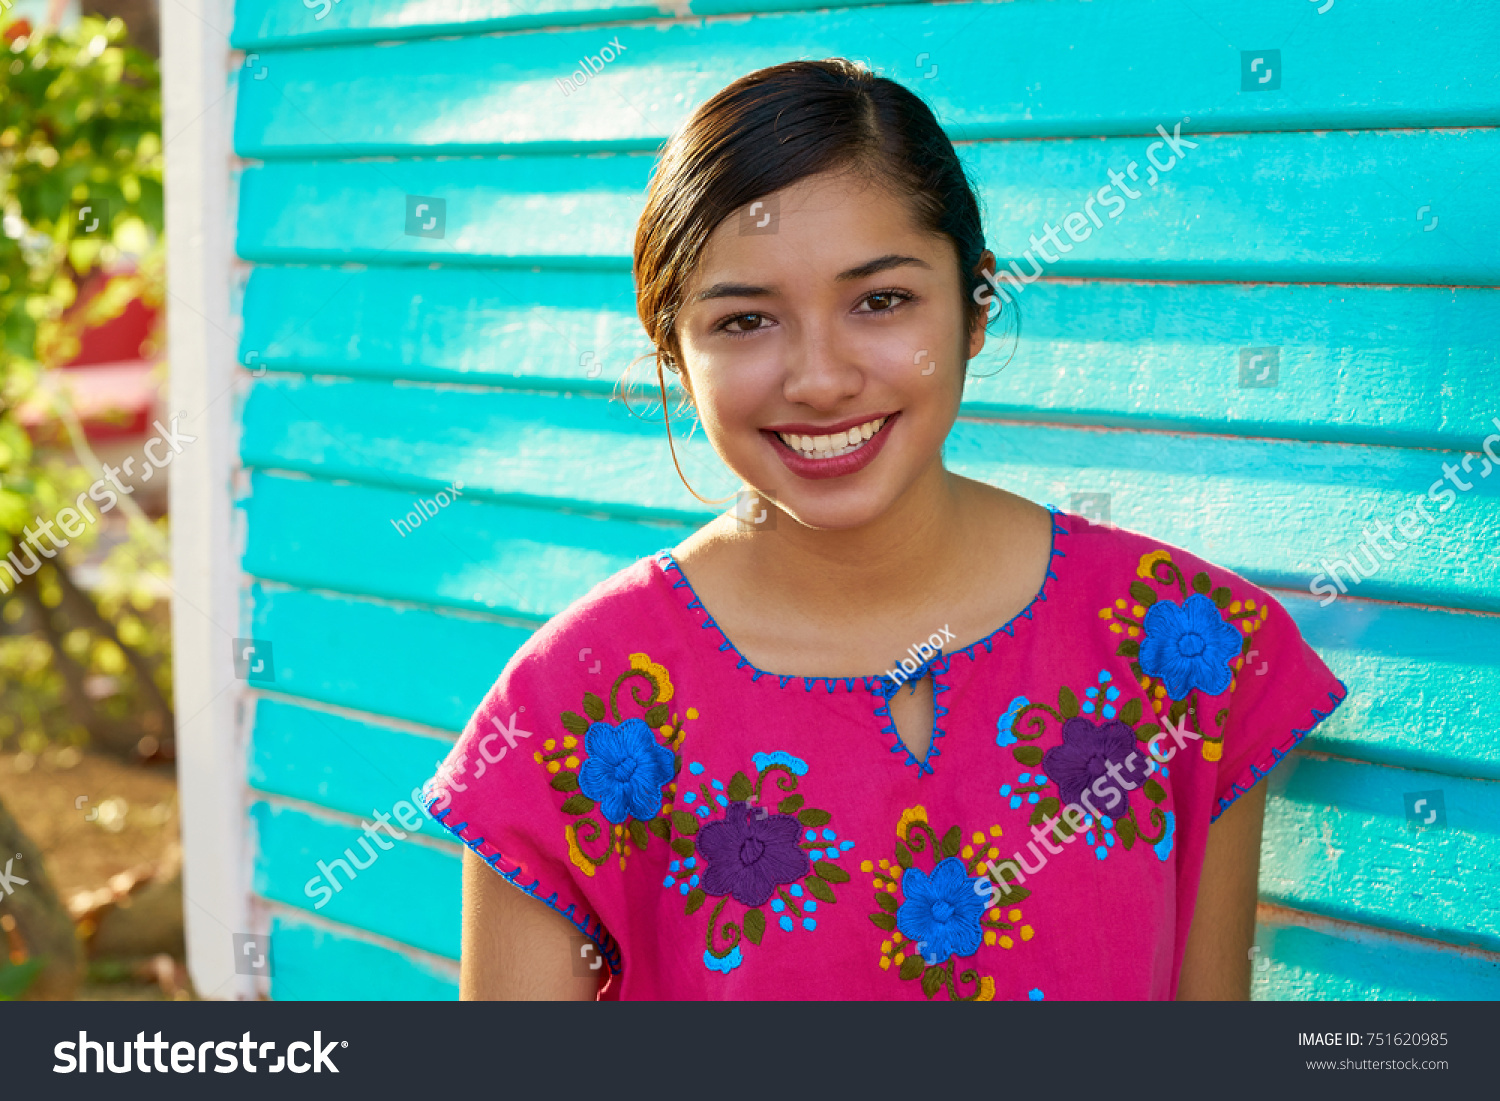 Mexican latin woman with mayan dress smiling in turquoise wall #751620985